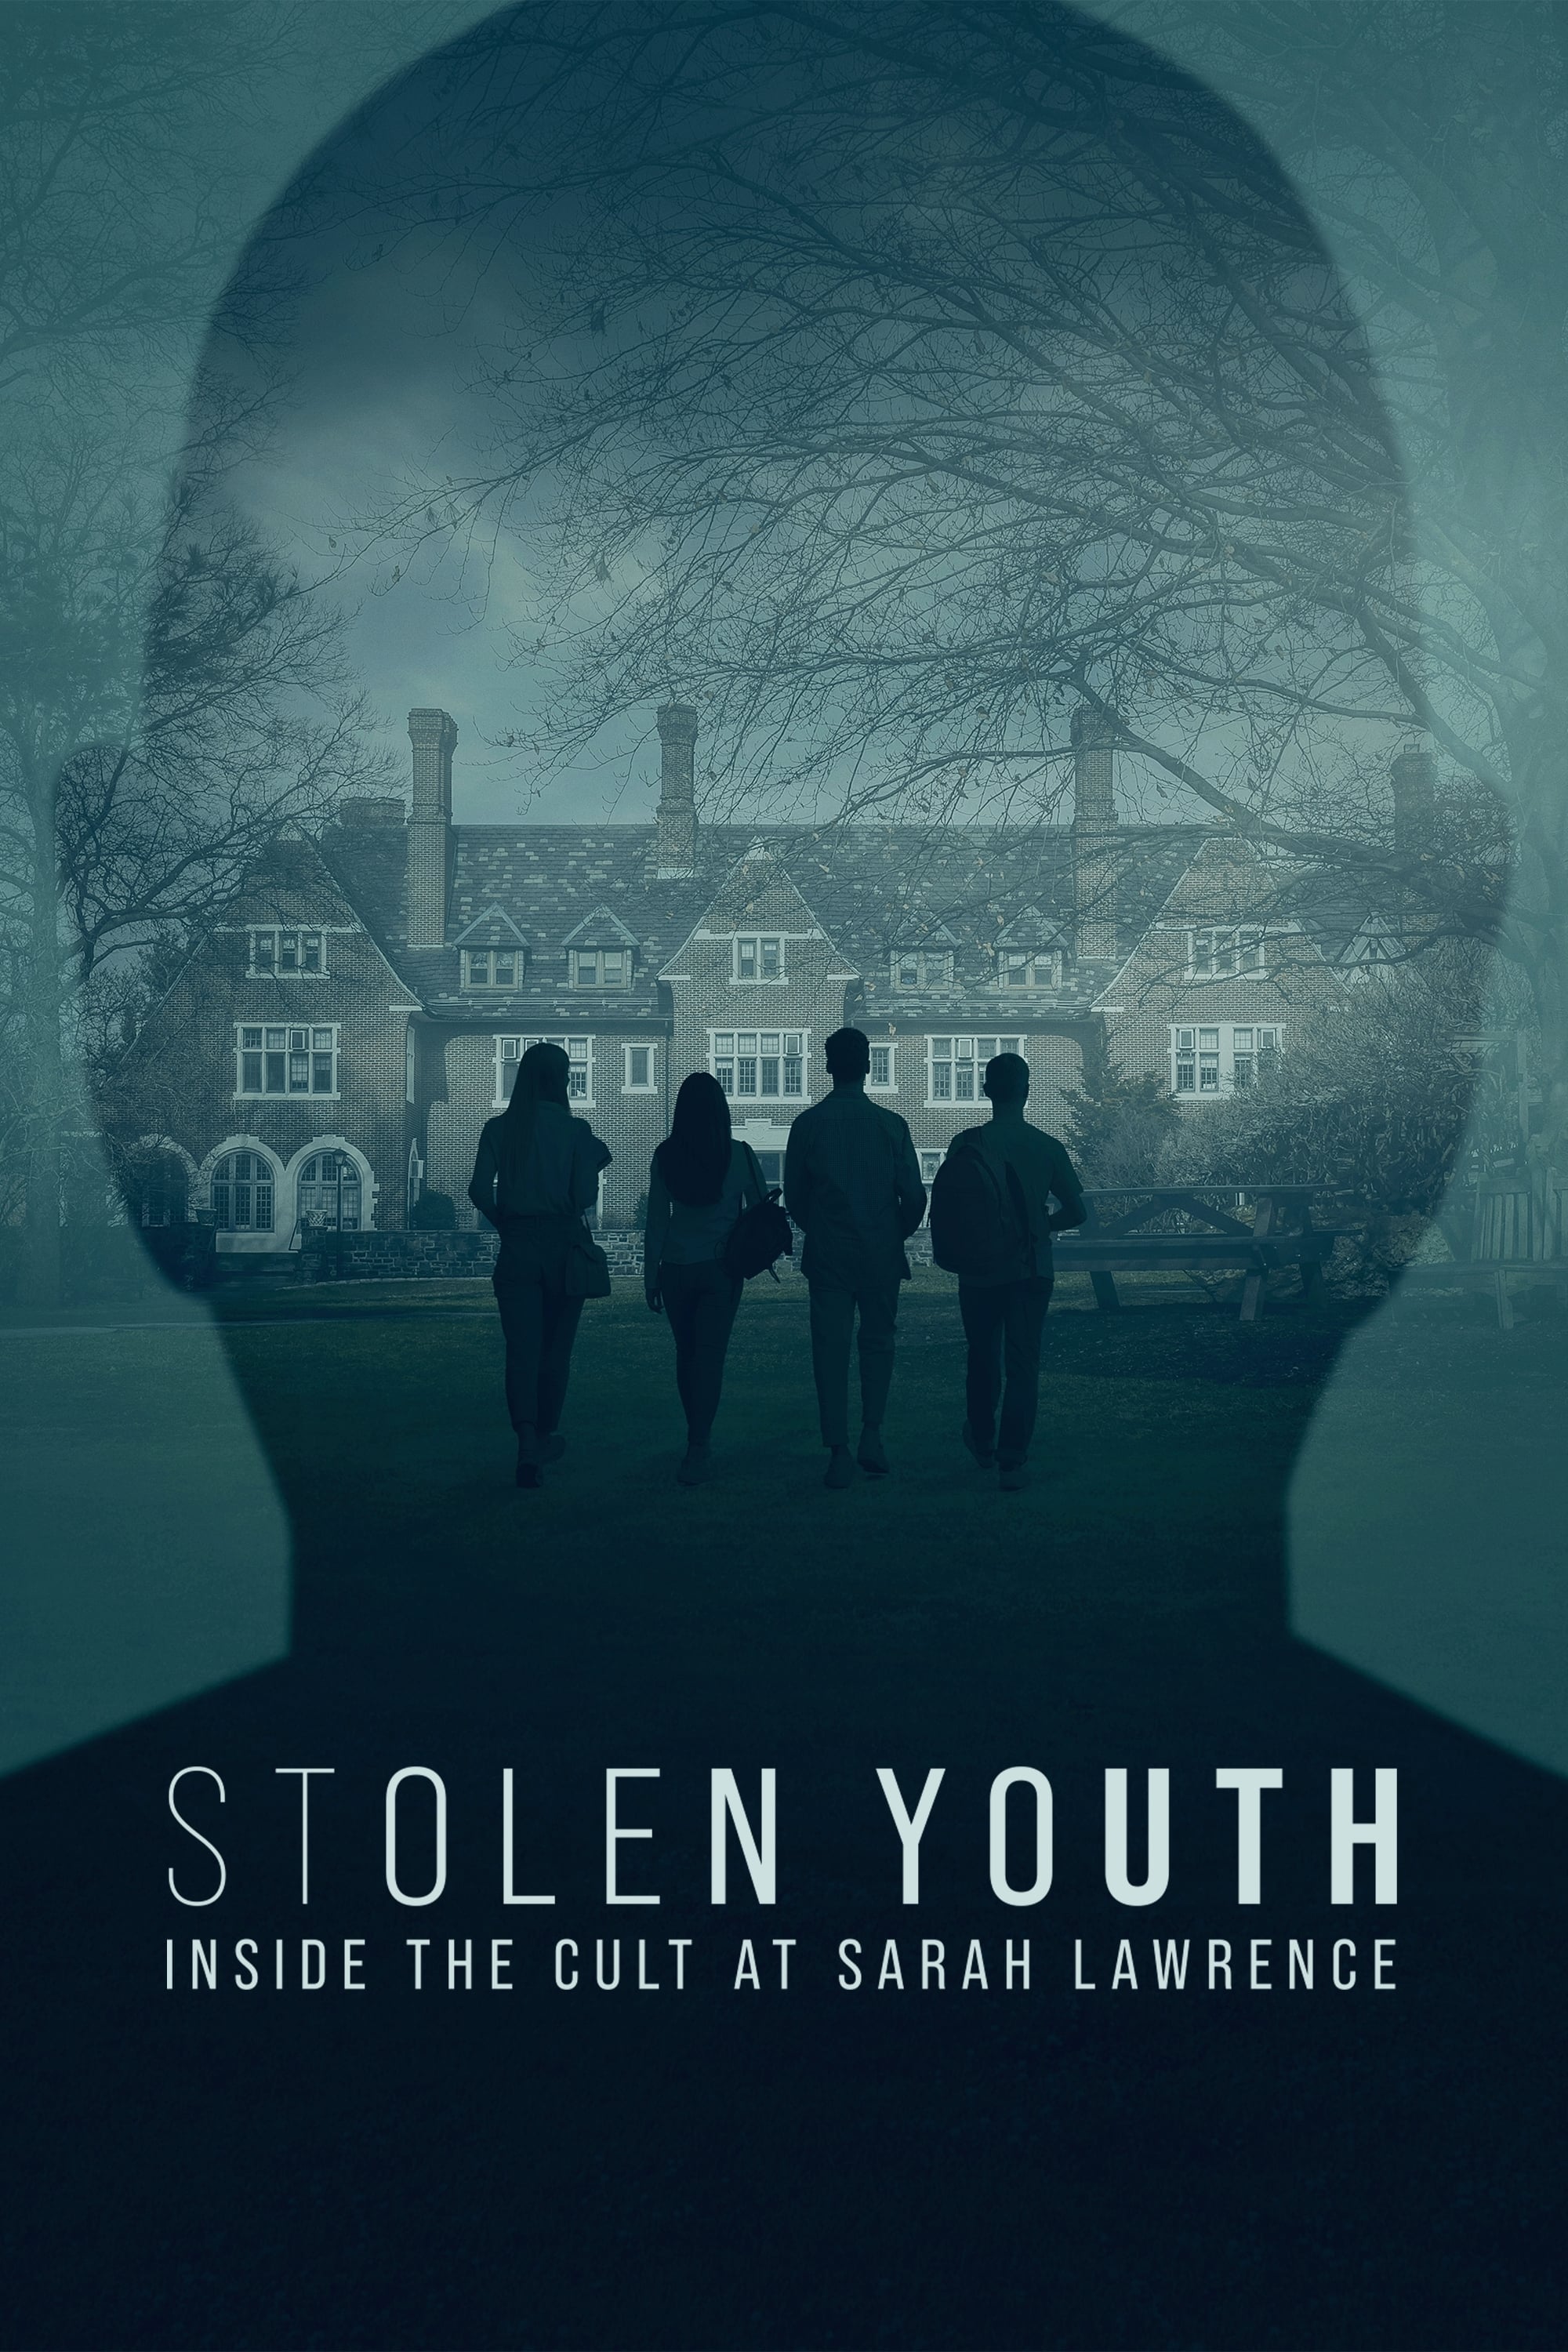 Stolen Youth: Inside the Cult at Sarah Lawrence TV Shows About True Crime